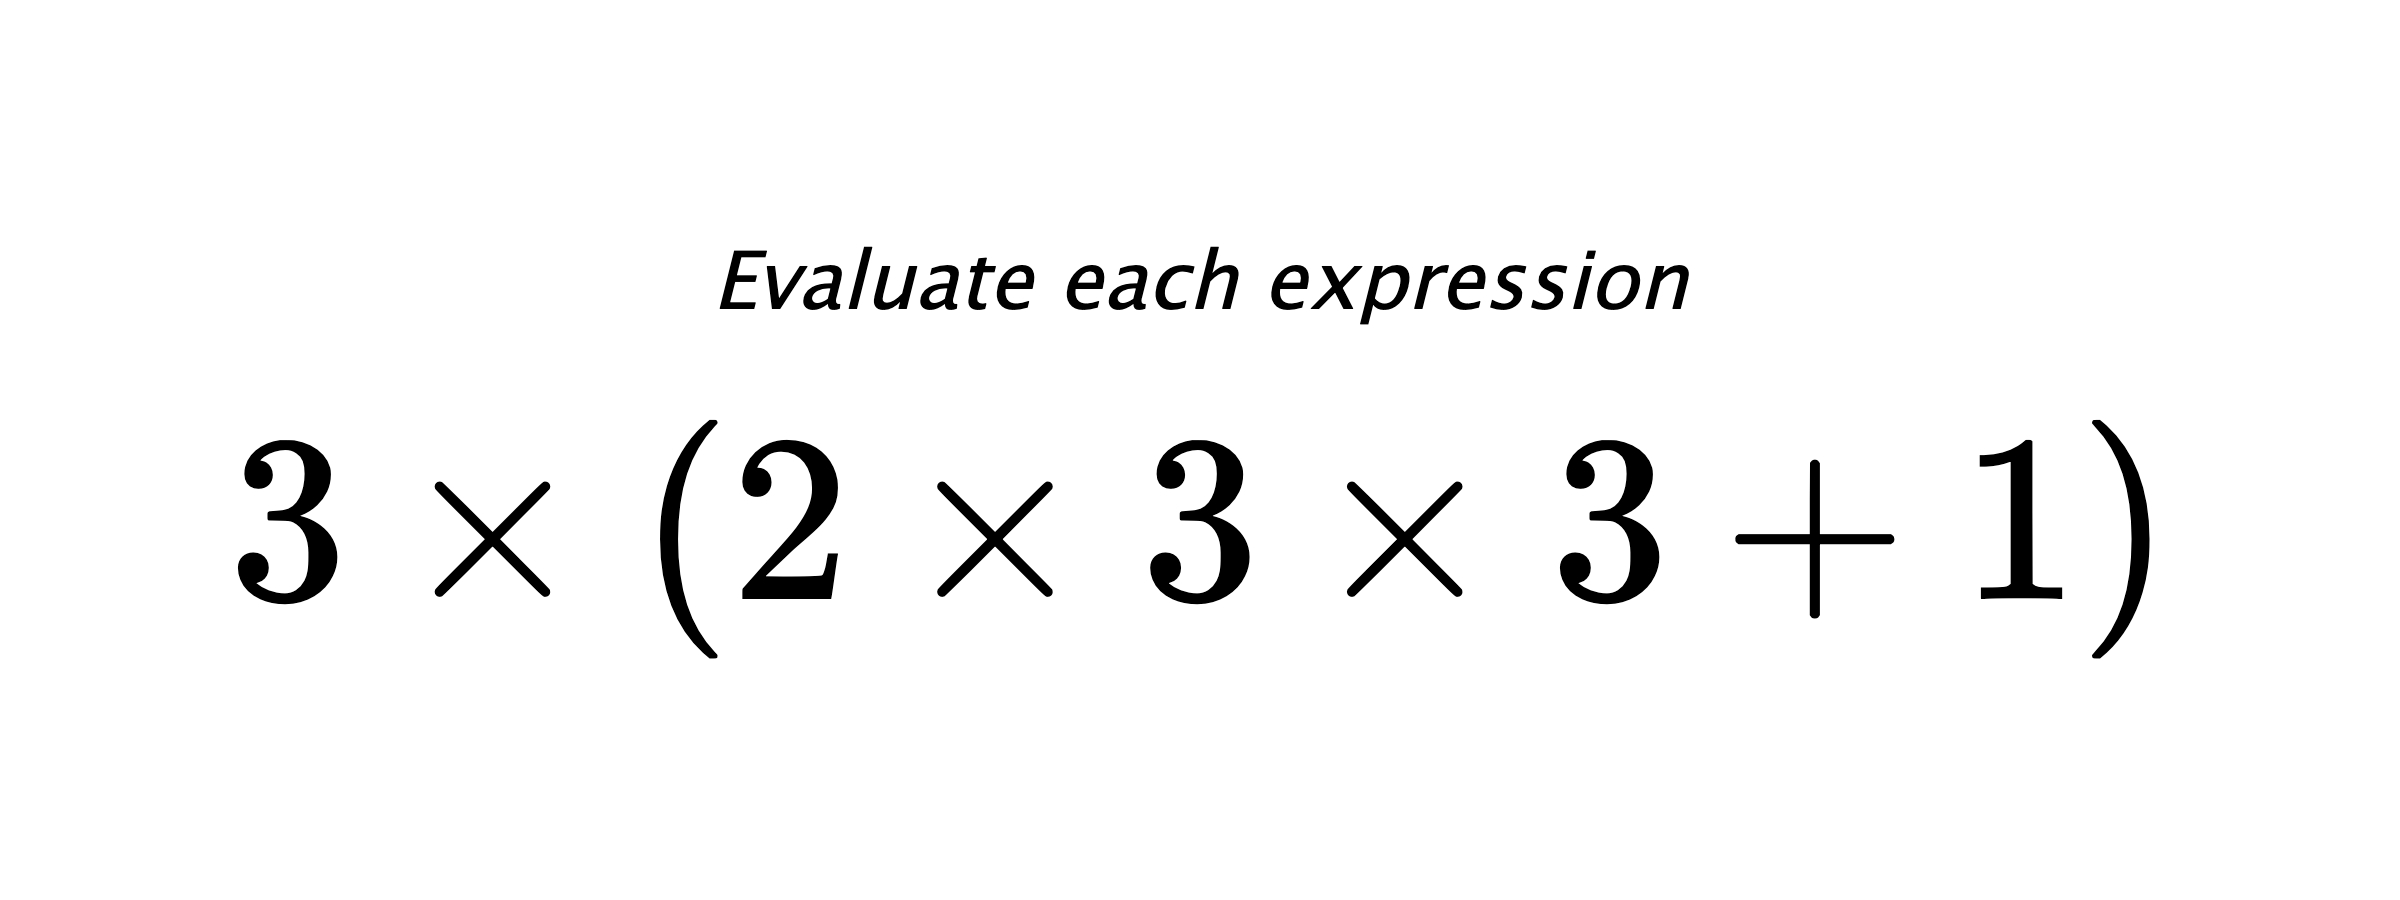 Evaluate each expression $ 3 \times (2 \times 3 \times 3 +1) $